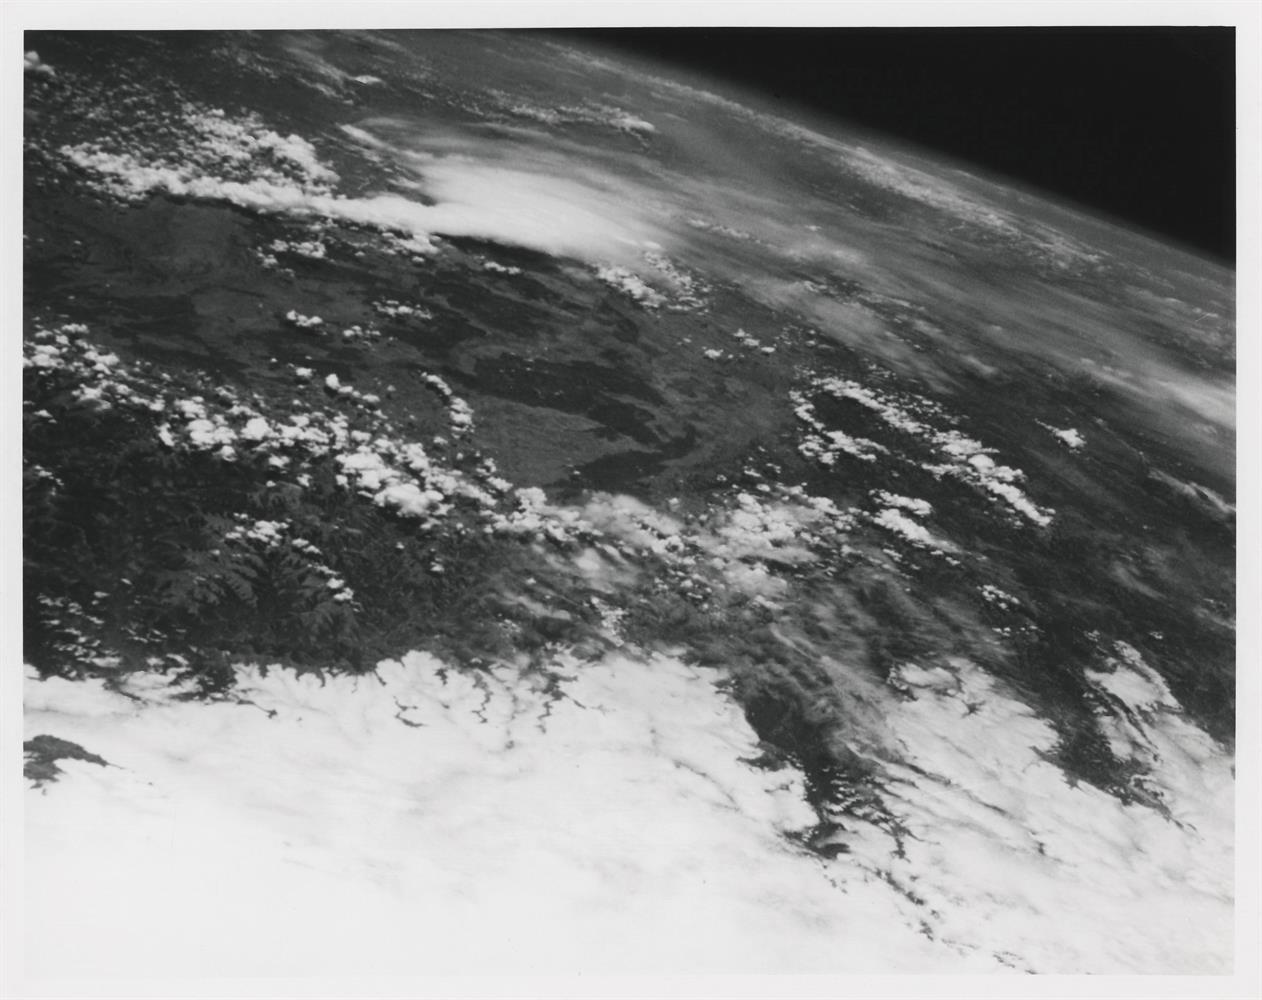 First Hasselblad photographs of the Earth from space (2 views), Mercury-Atlas 9, 15-16 May 1963 - Image 2 of 5